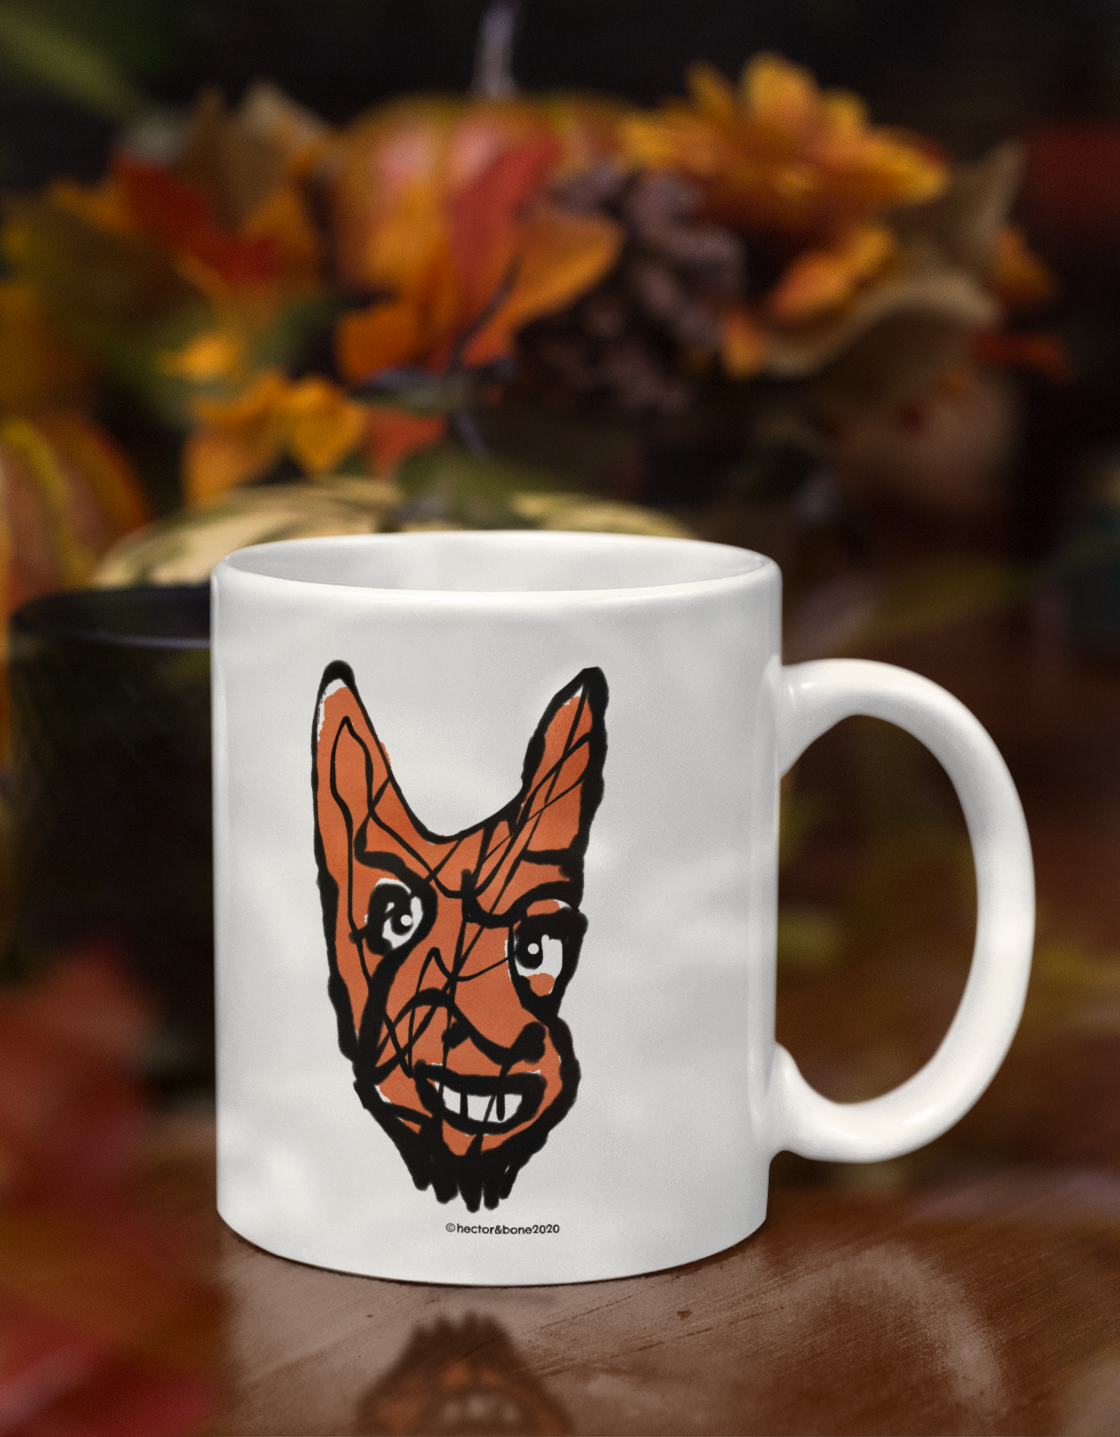 A Cheeky Little Devil Halloween original illustrated ceramic coffee mug by Hector and Bone